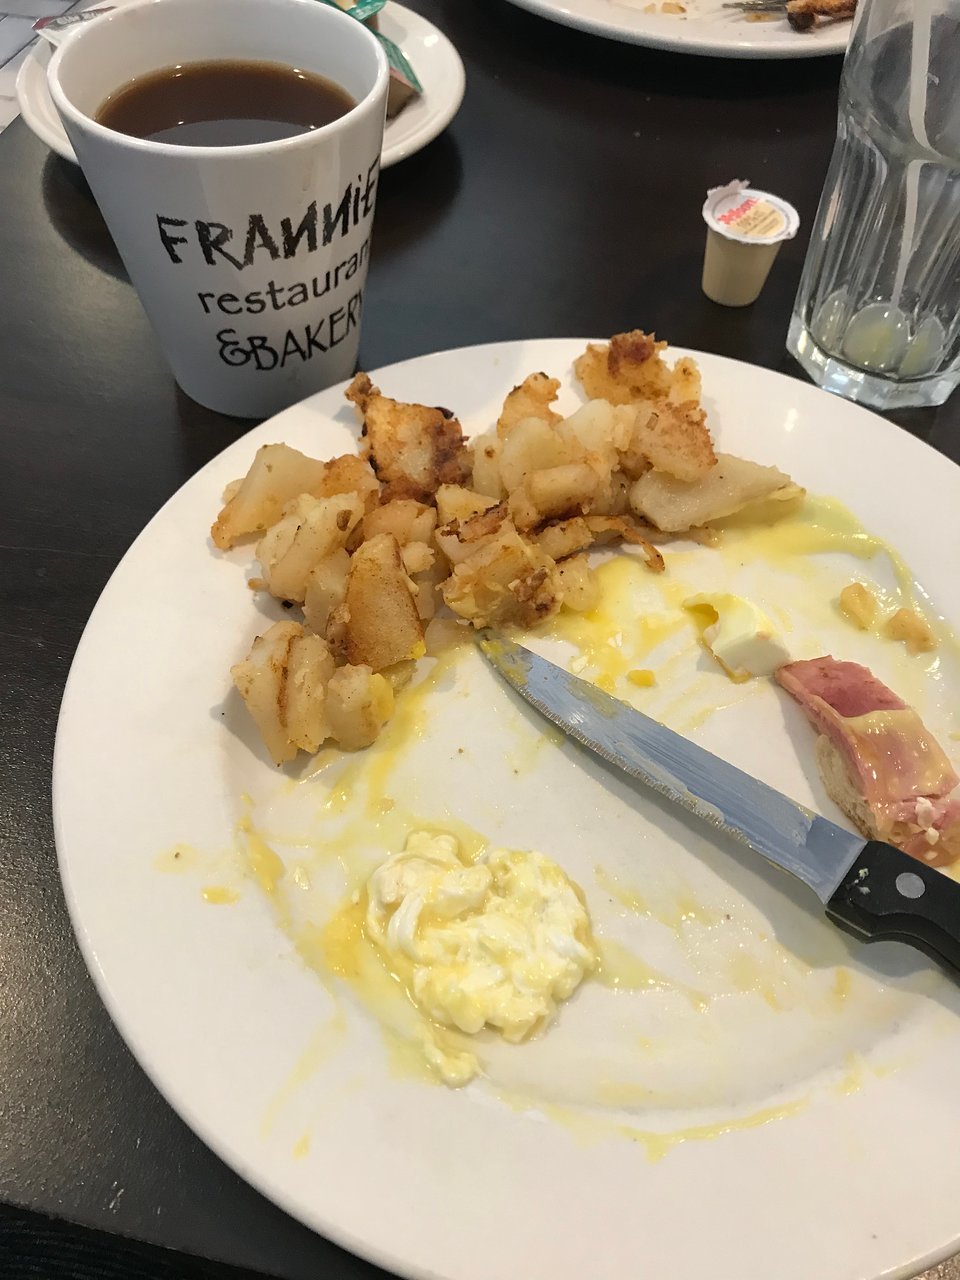 Frannies Restaurant and Bakery